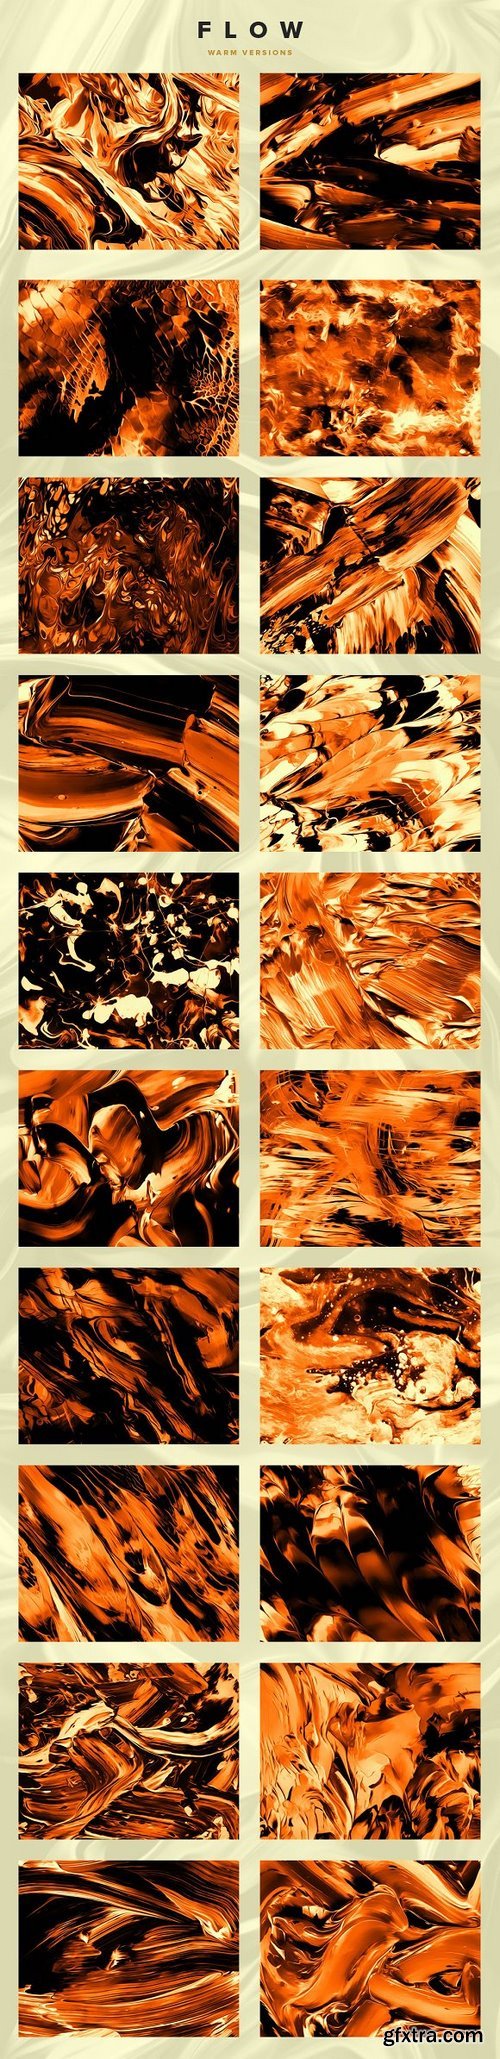 CM - Flow: 100 fluid abstract paintings 1631334